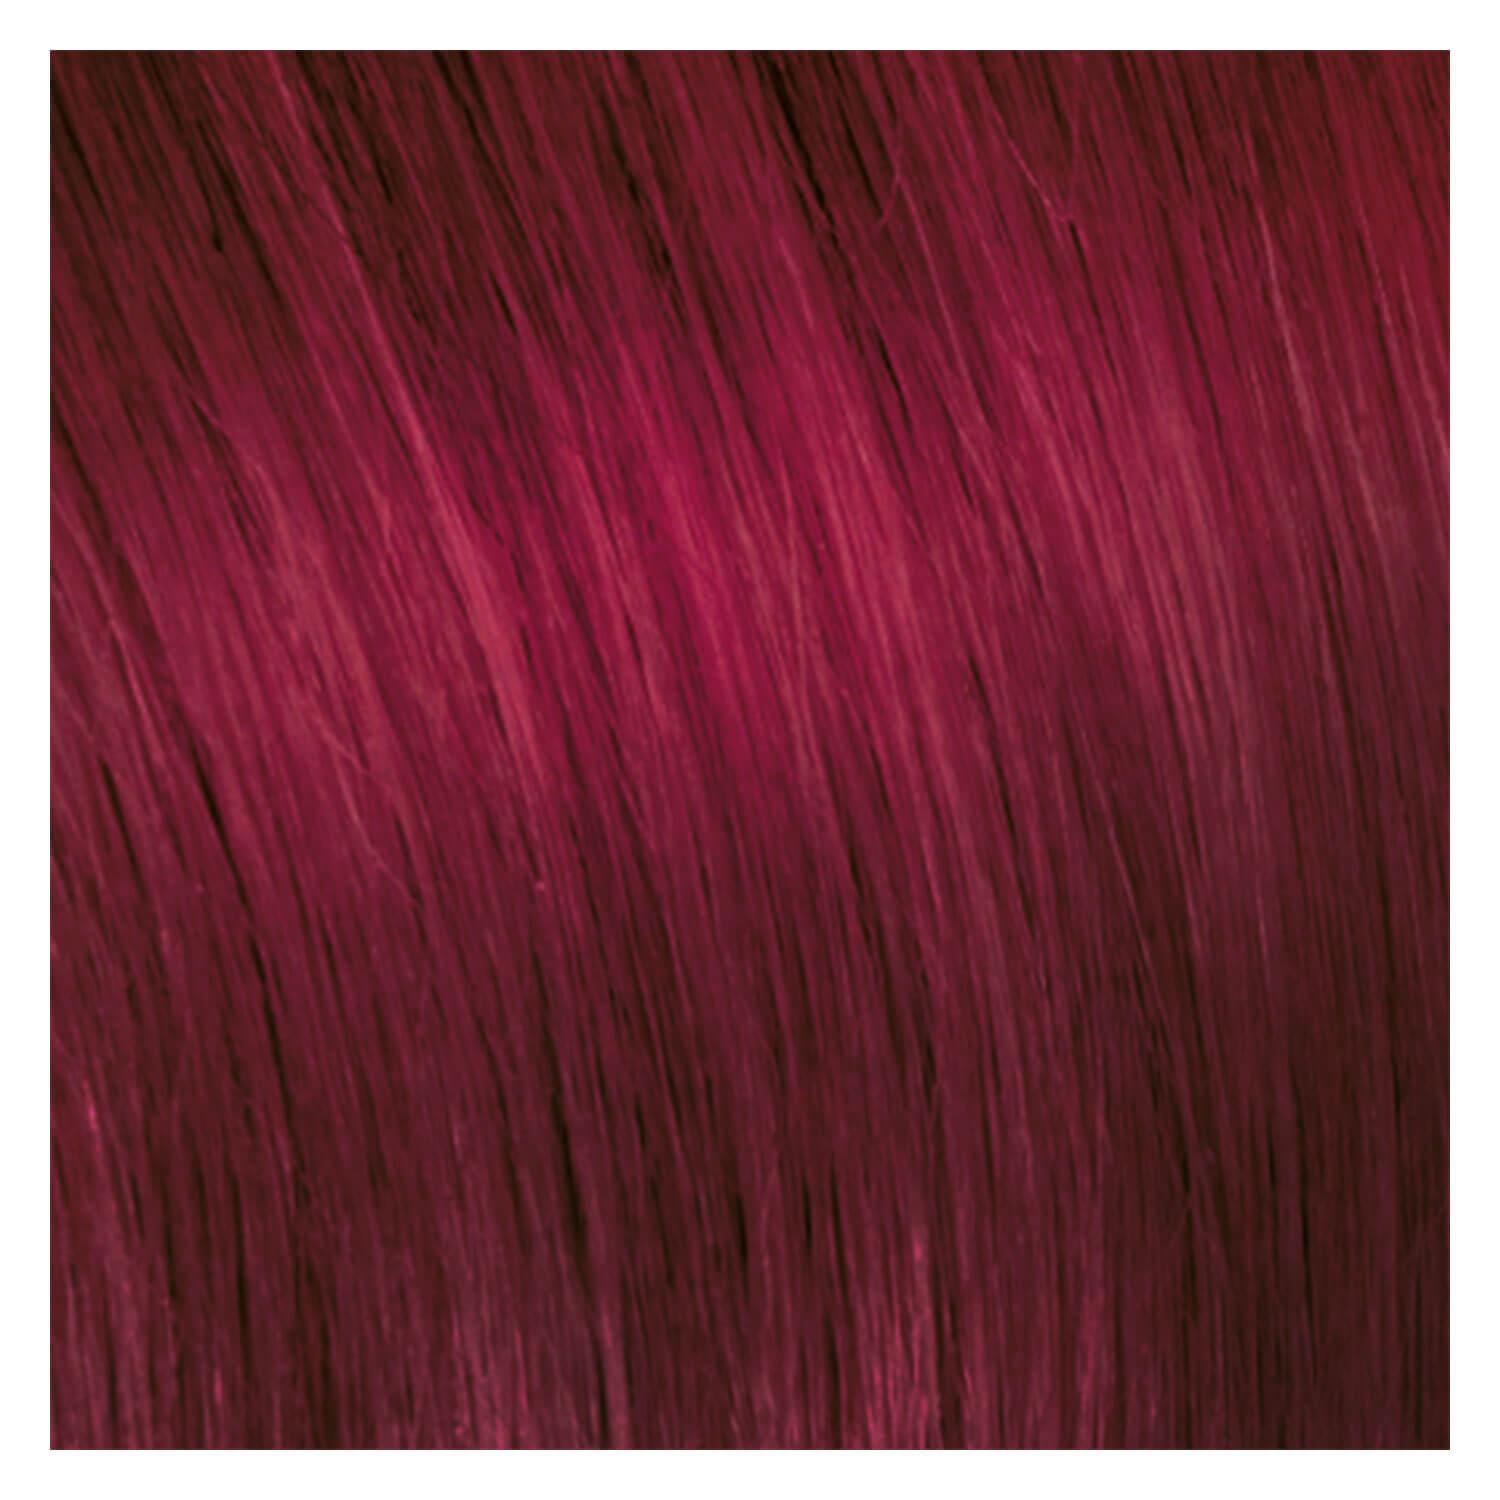 SHE Bonding-System Hair Extensions Wavy - 530 Rouge Rubis 55/60cm